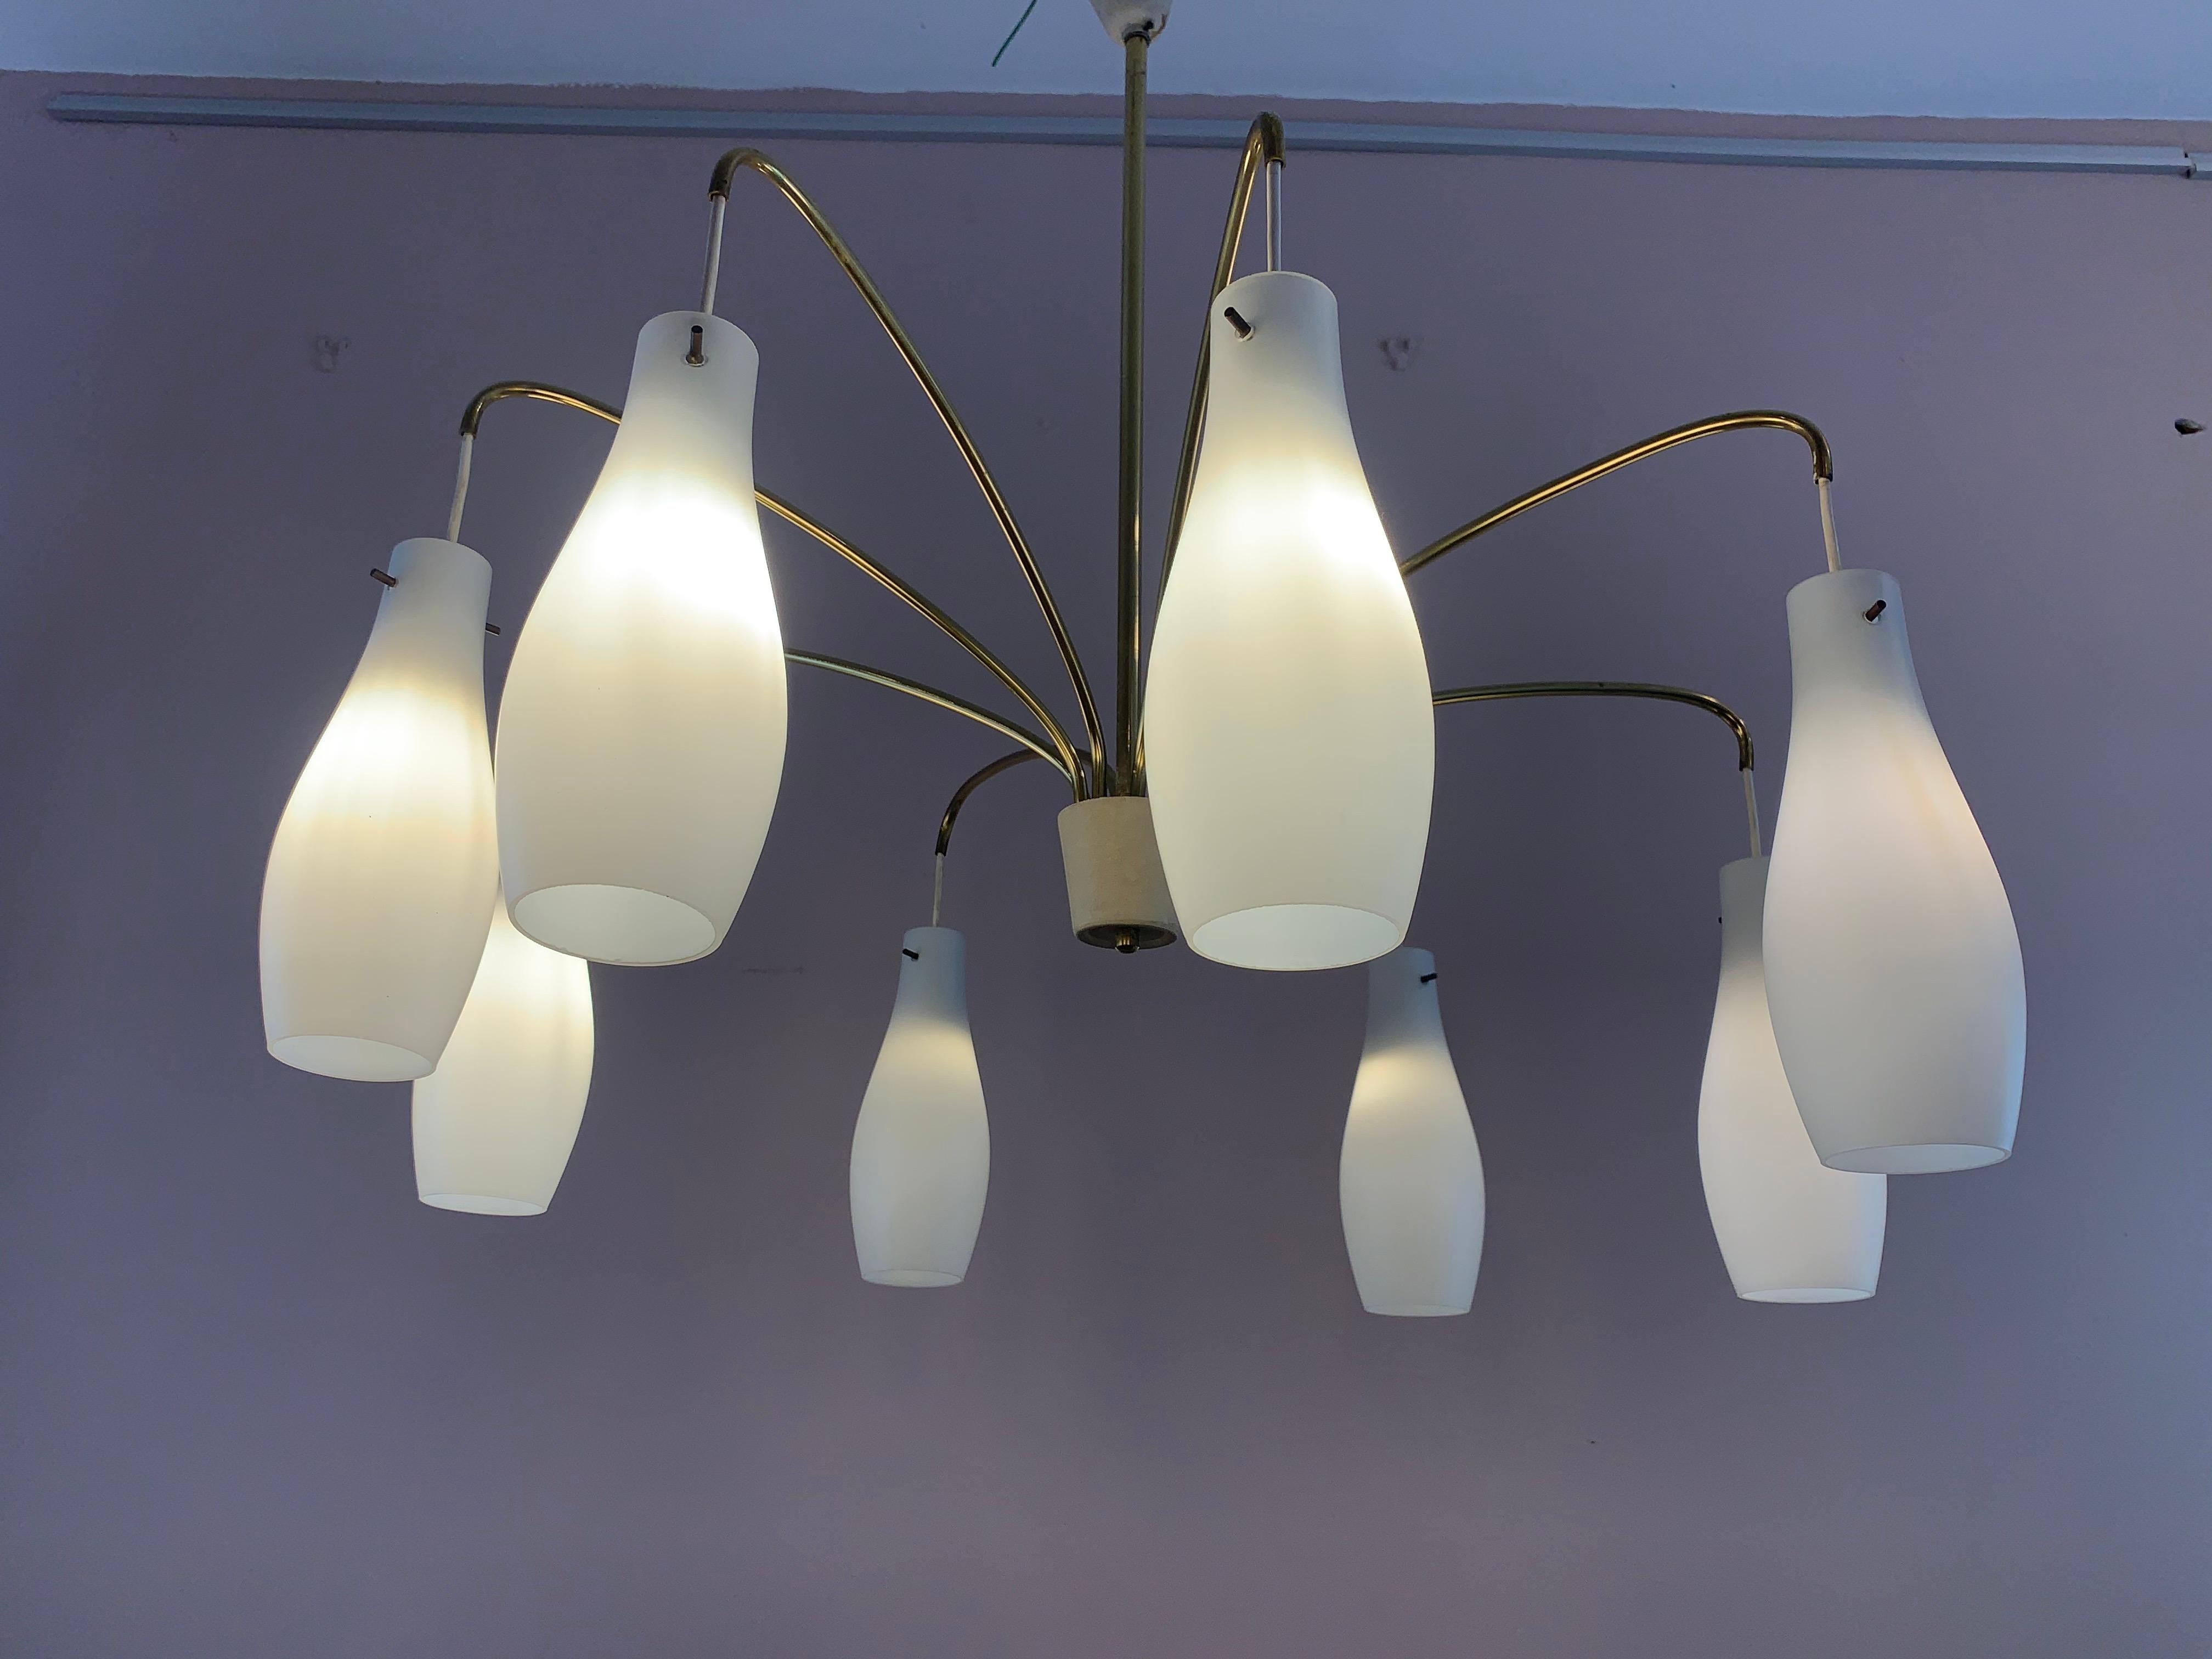 1960s Belgium midcentury 8-arm opaline glass shade hanging light. Each shade is suspended from a brass arm which swivel to ensure each one is equidistant from the other which helps to ensure the light is balanced correctly. The single E14 screw in